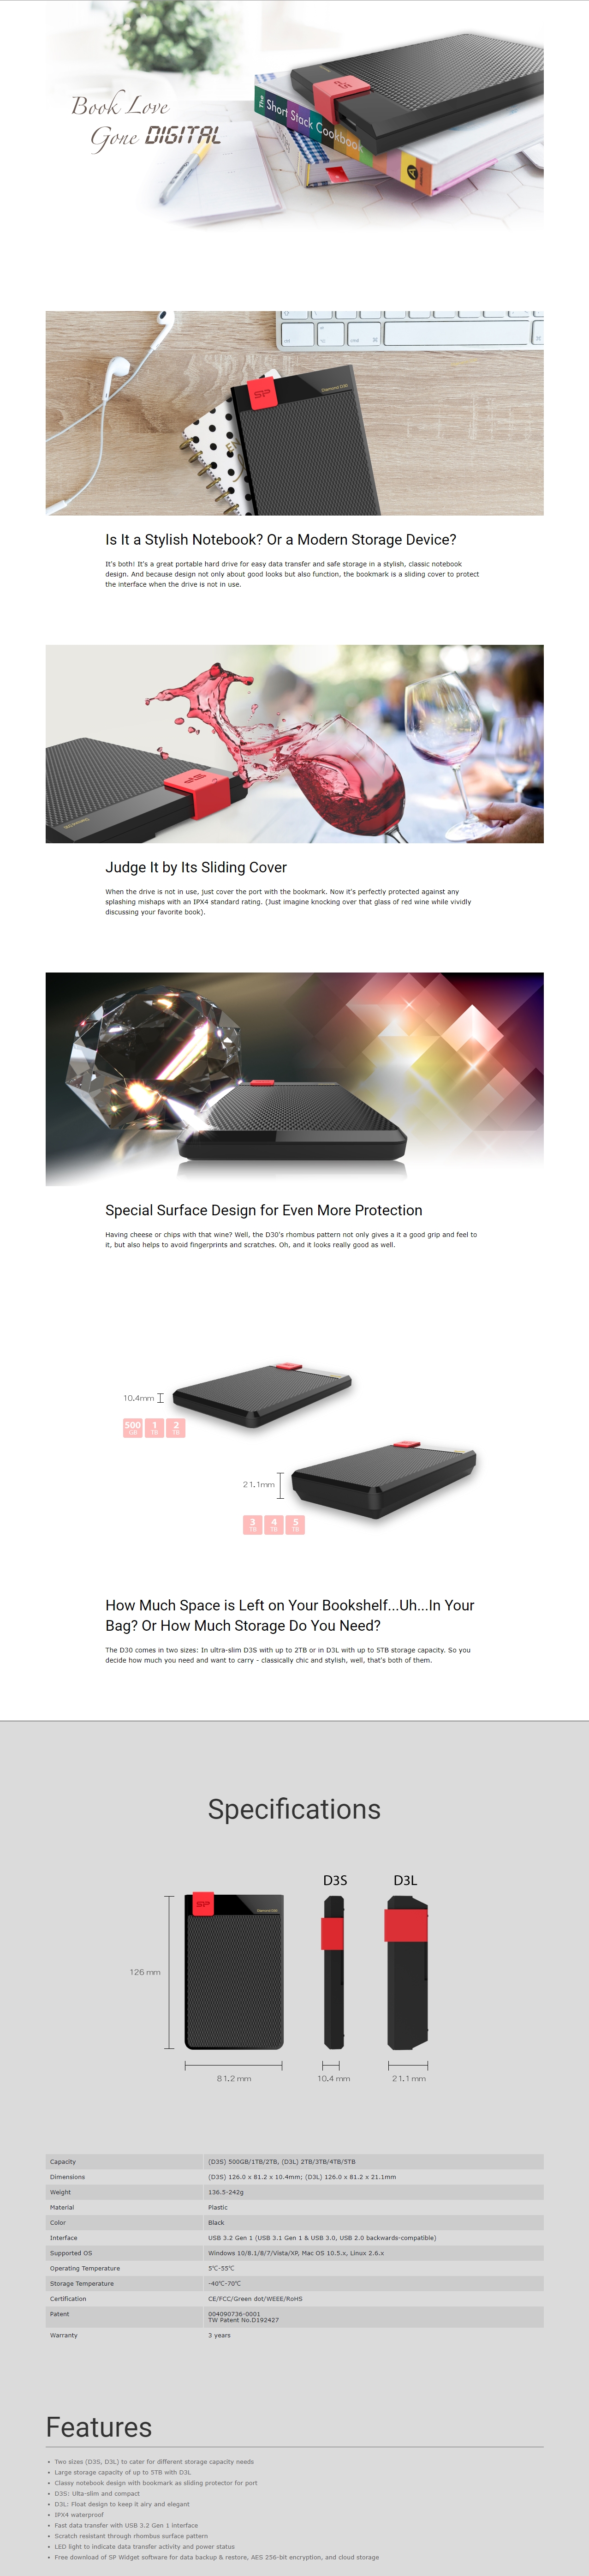 A large marketing image providing additional information about the product Silicon Power D30 4TB USB3.1 Water-Resistant External Hard Drive - Additional alt info not provided